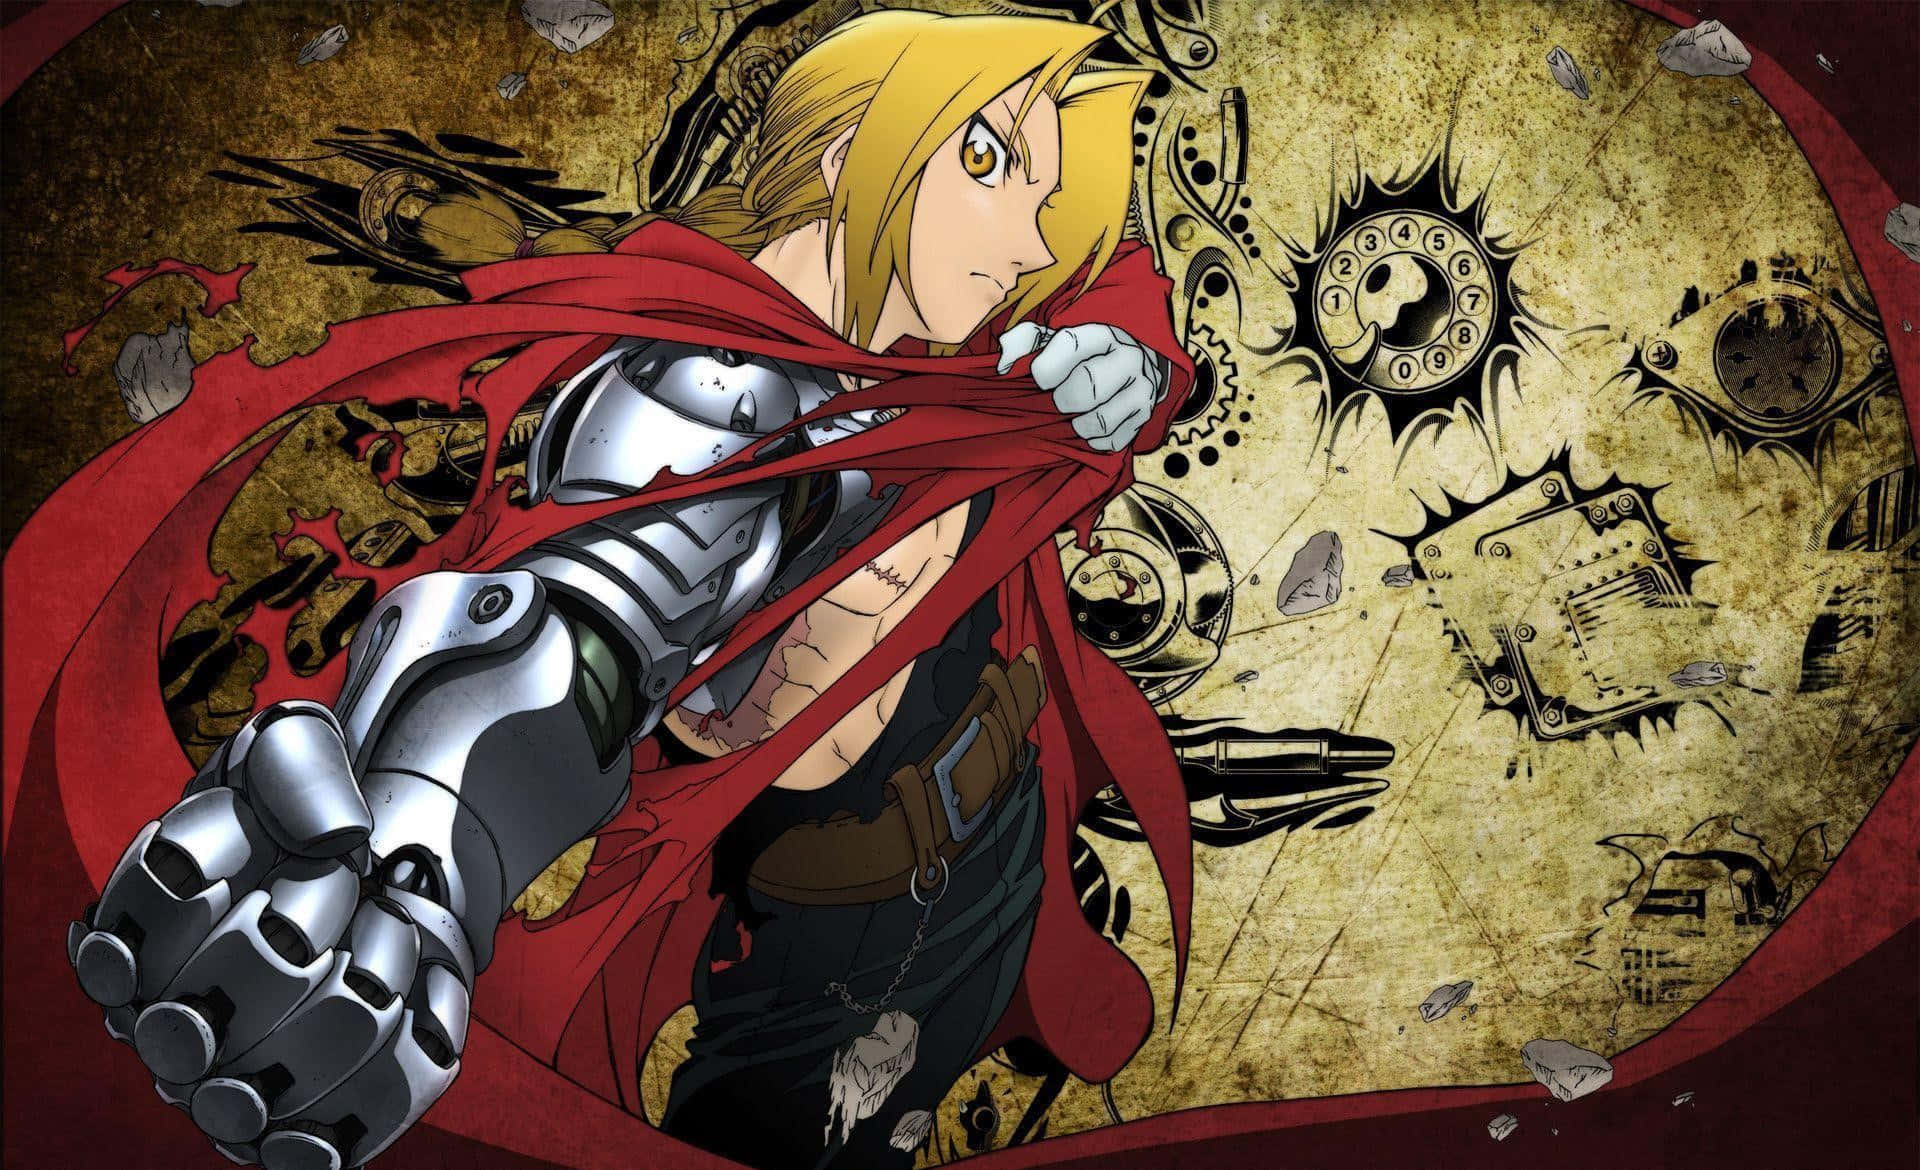 Two Fullmetal Alchemist brothers in an Epic Duel